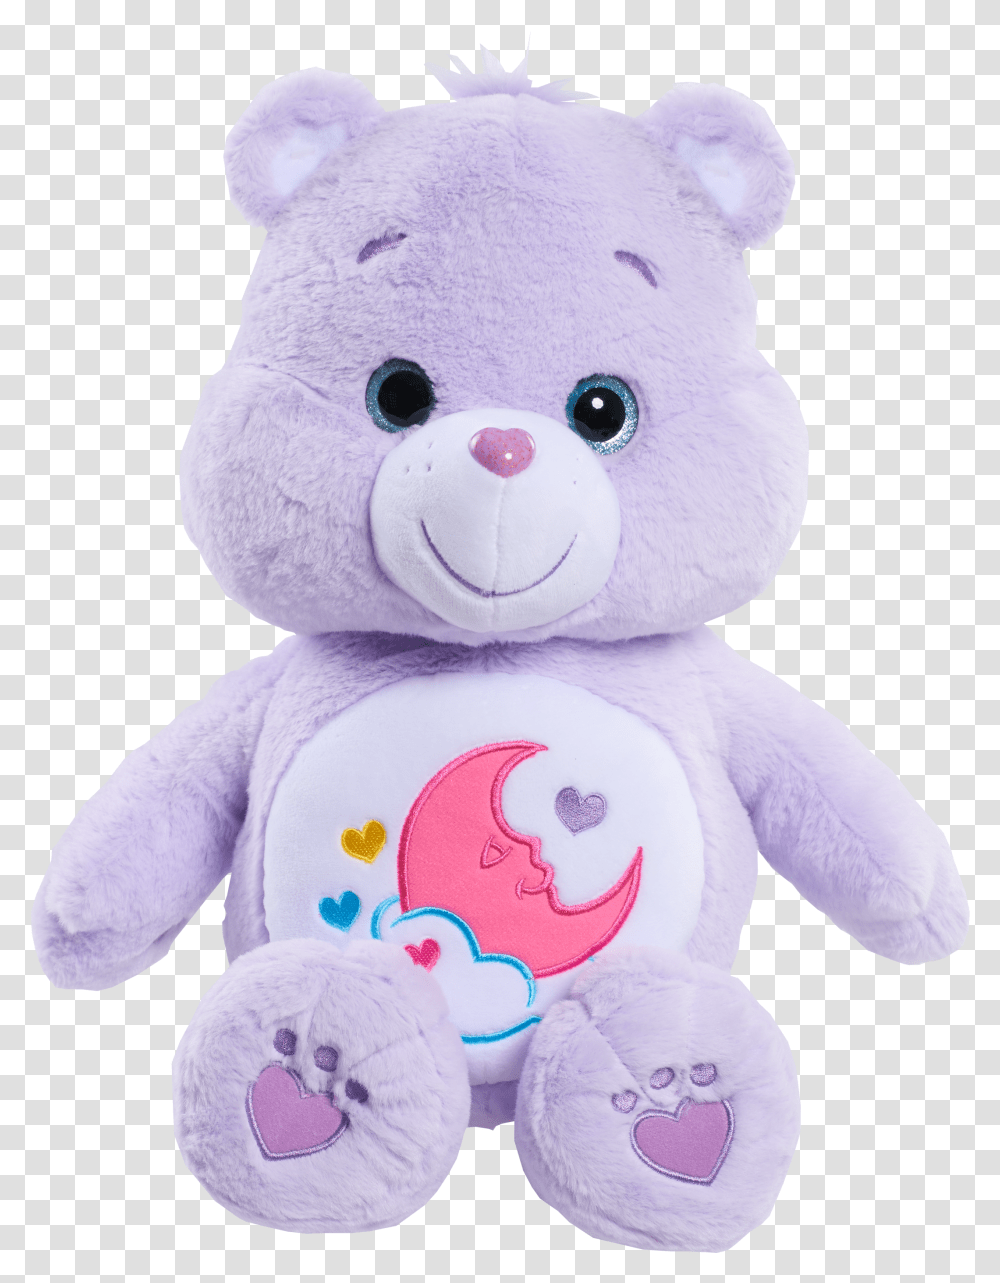 Care Bears Jumbo Plush Teddy Bear Images Download Hd Transparent Png